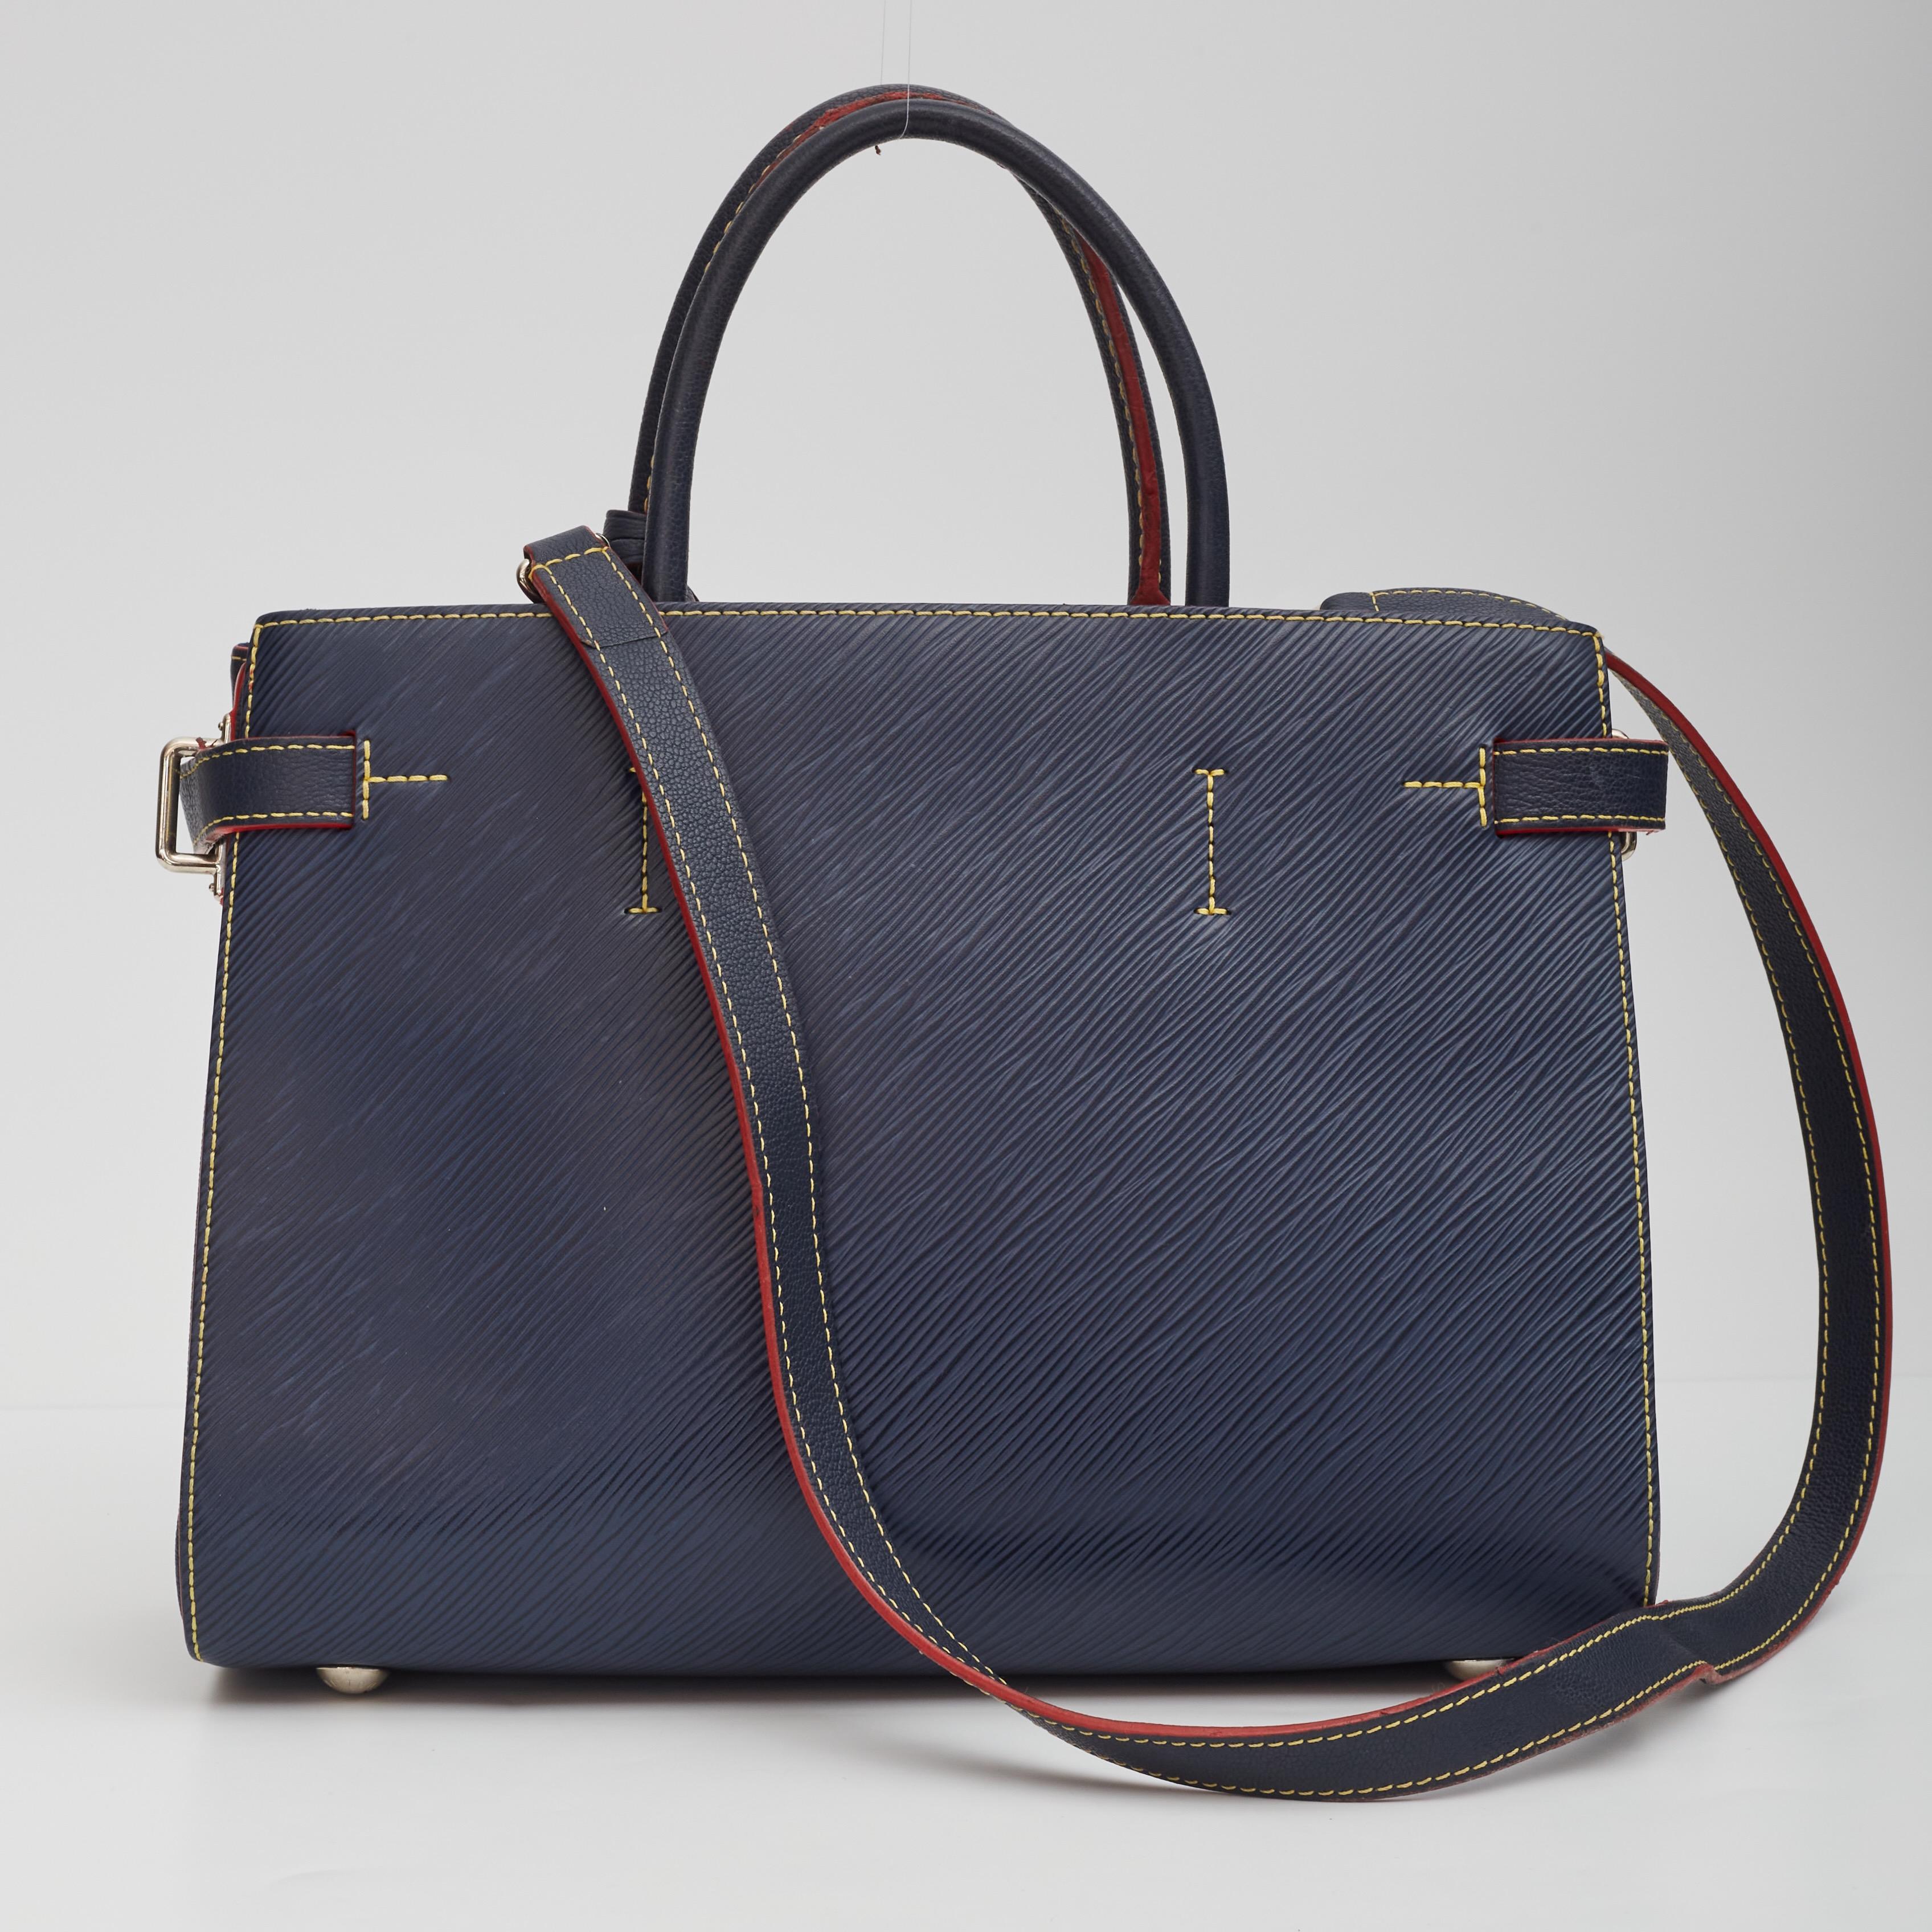 This tote is crafted of textured epi leather in dark blue. The handbag features red glazing trim, contrasting yellow stitching, adjustable leather side straps, and polished silver hardware including a frontal LV turn lock. Dual top handles and an